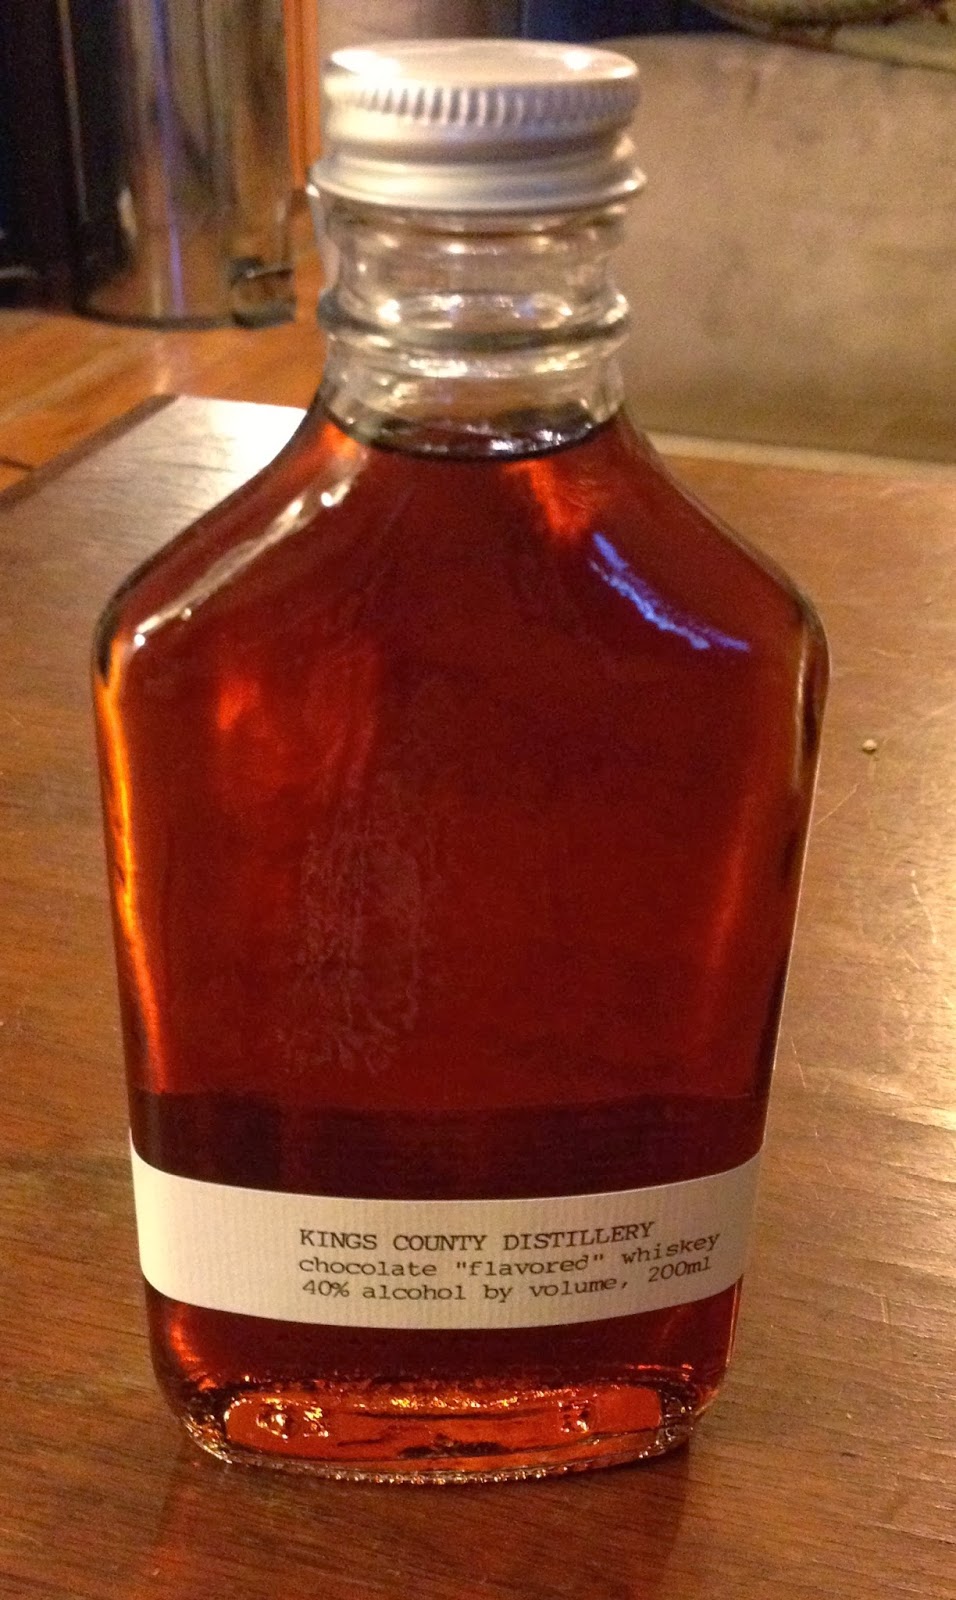 Chocolate NYC: King's County Distillery Chocolate-Flavored Whiskey